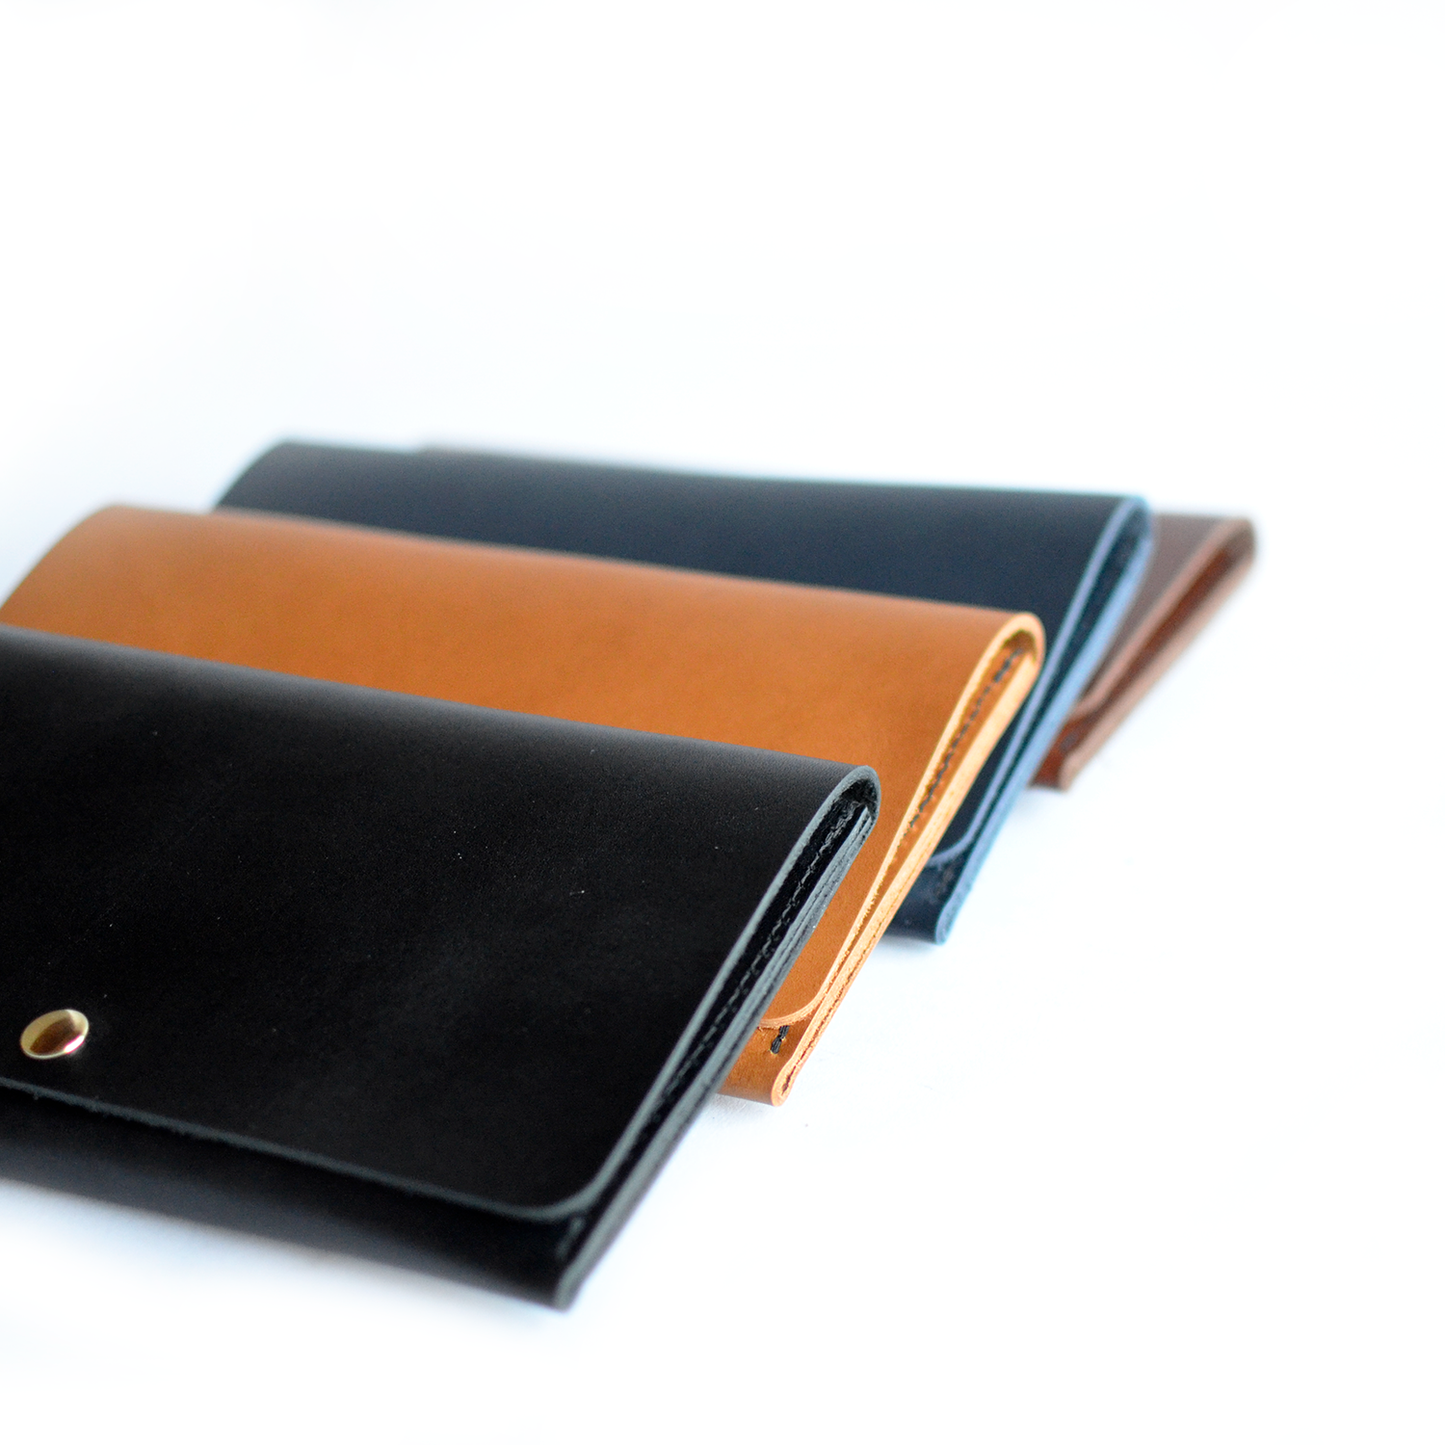 WILLOW 3-in-1 Wallet (+ clutch & crossbody) - Navy Blue Leather